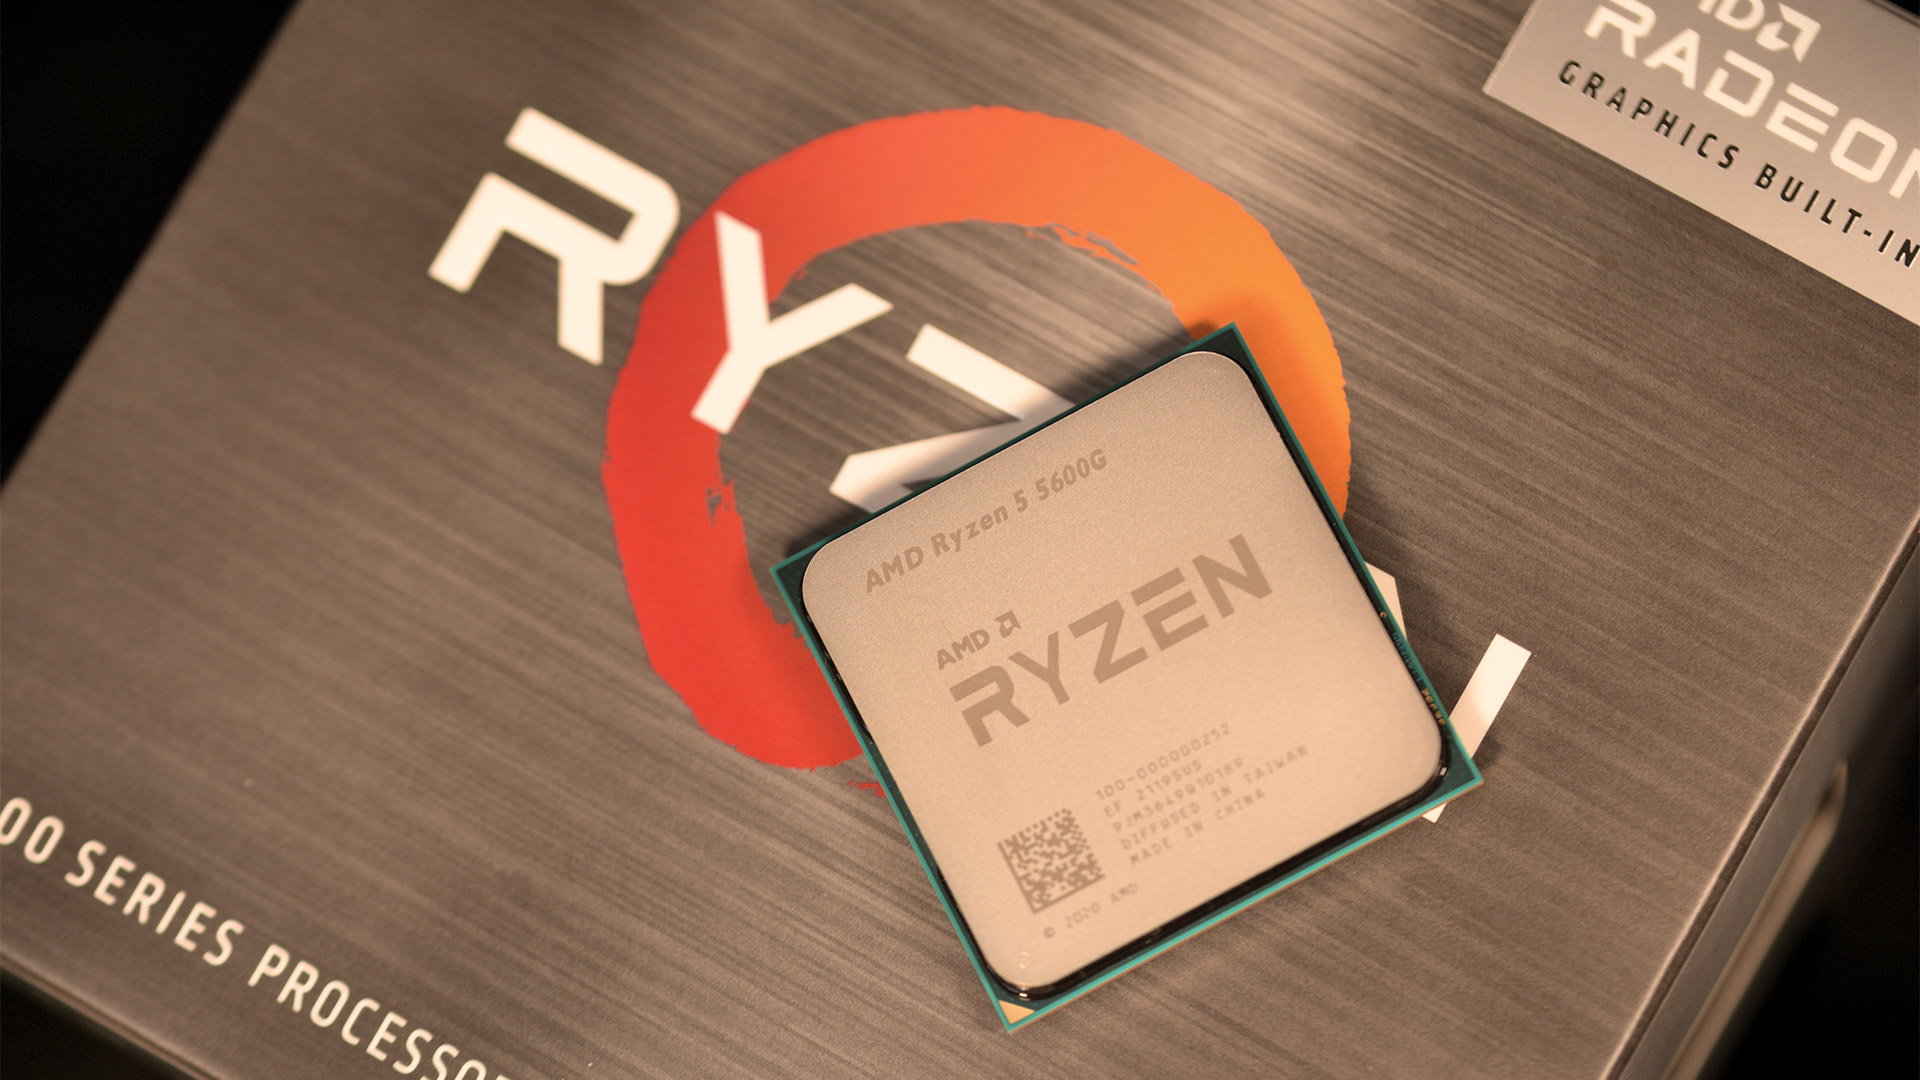 AMD Ryzen gaming PCs and CPUs are being targeted by cryptocurrency miners